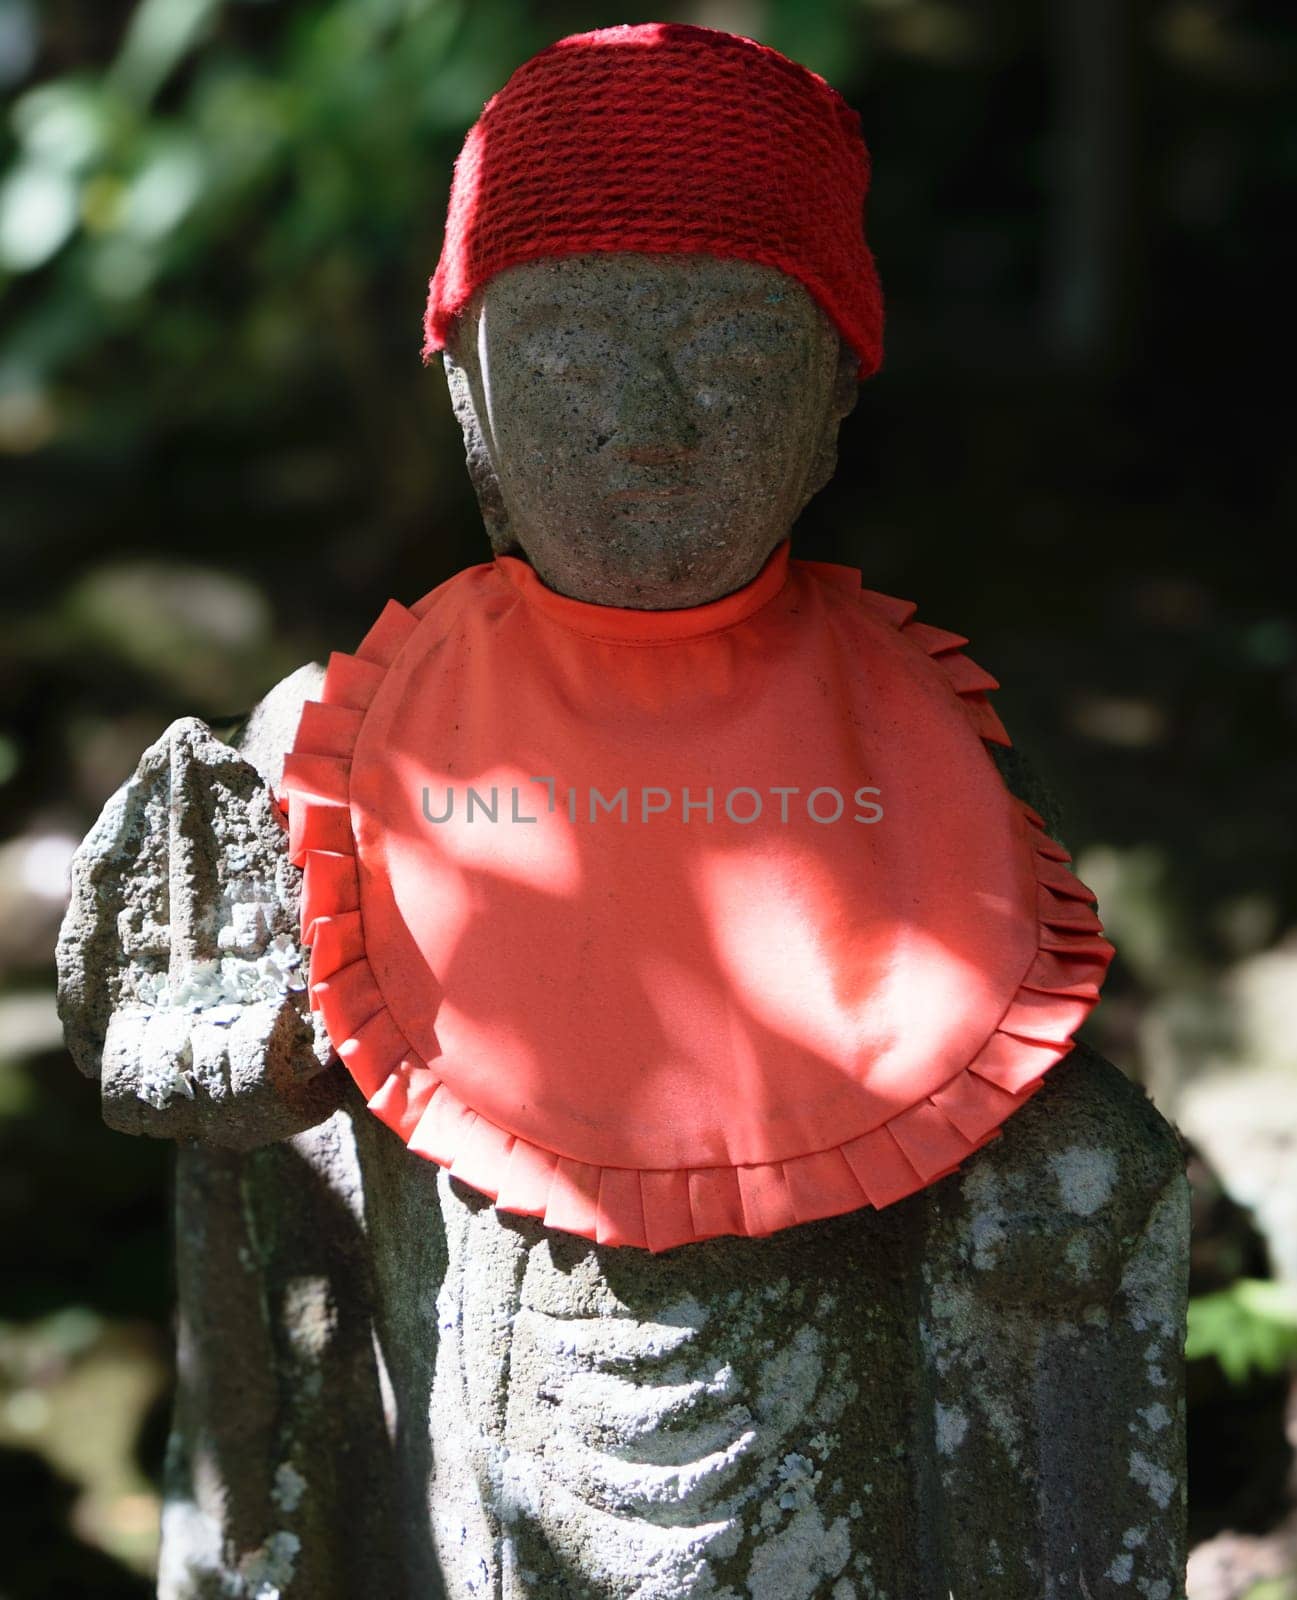 A small stone statue with a knitted hat.